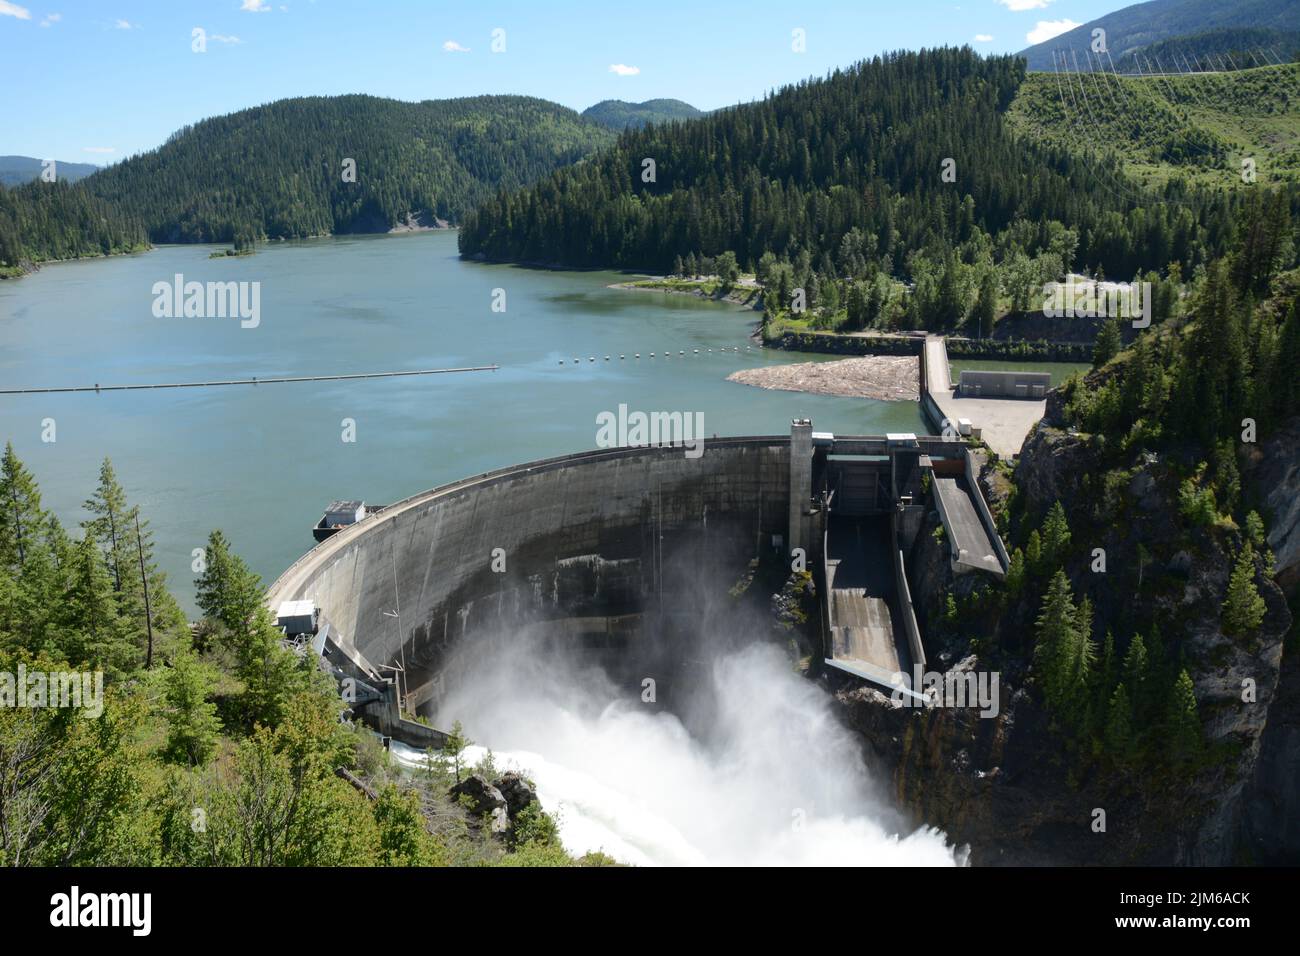 Aerial view of the concrete arch hydro-electric Boundary Dam spilling water on the Pend-Oreille River, flowing into Canada, in Washington State, USA. Stock Photo